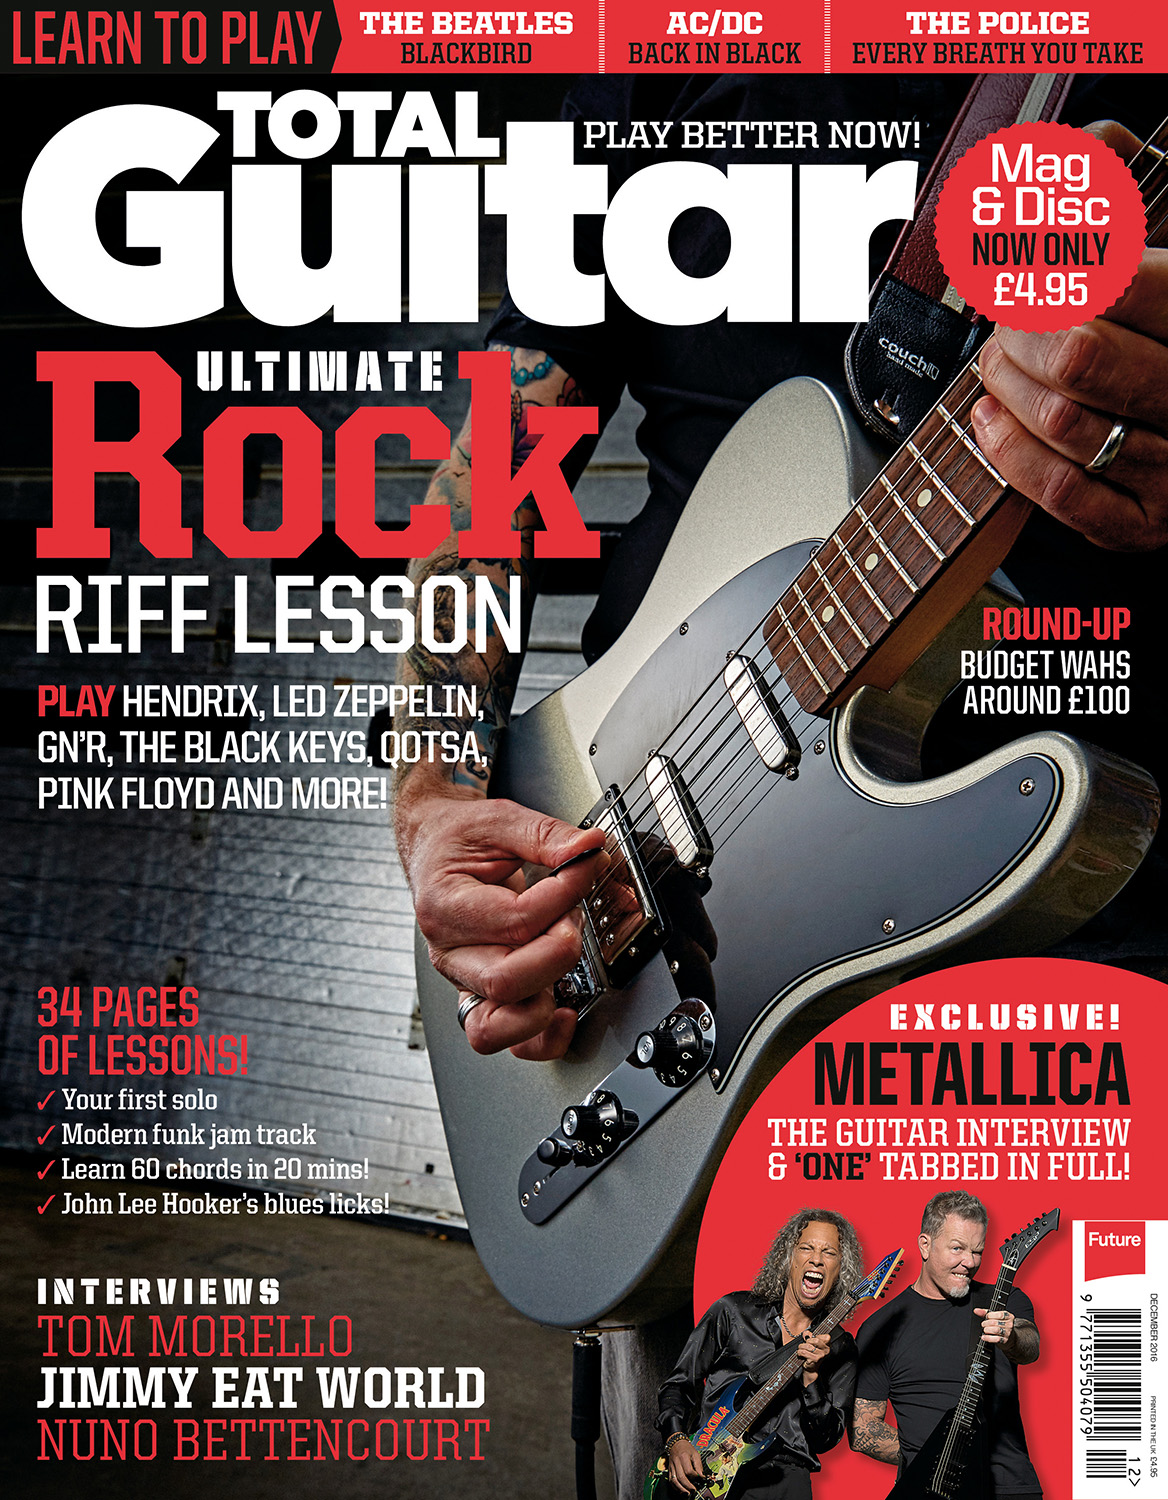 Total Guitar issue 287 cover. Photo by Adam Gasson / adamgasson.com